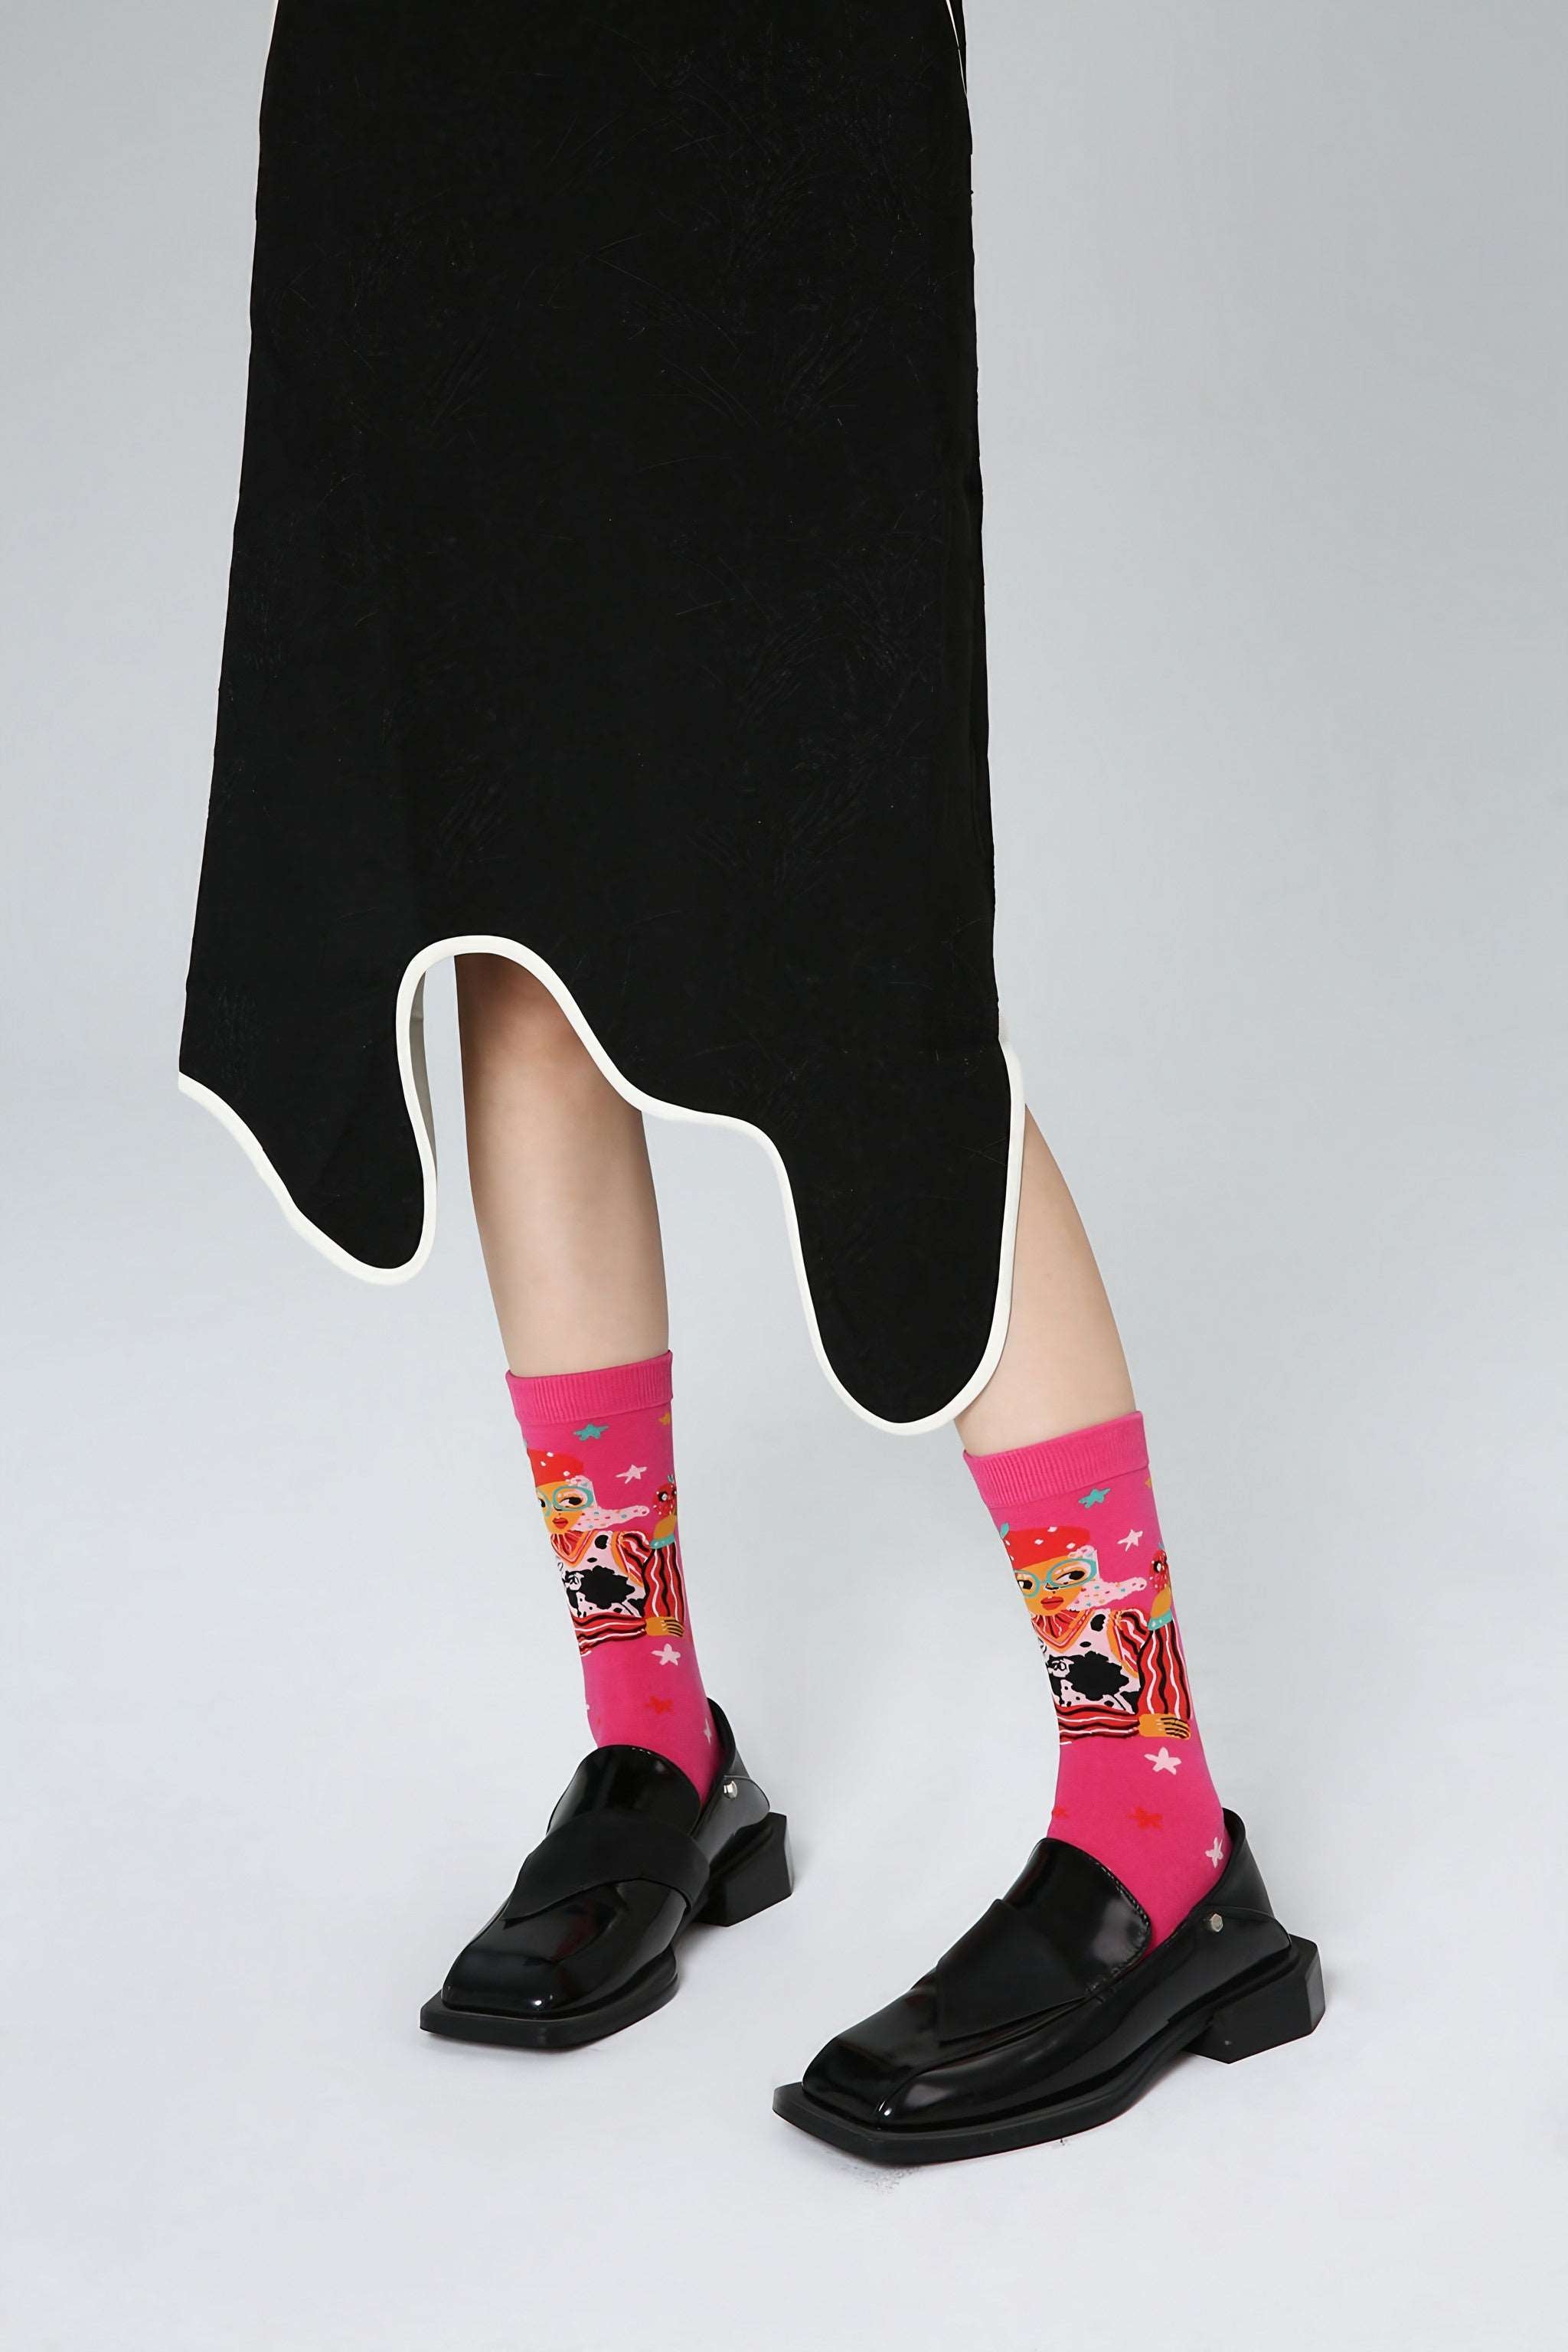 Trendy pink socks from the Blackpink set paired with chic black shoes